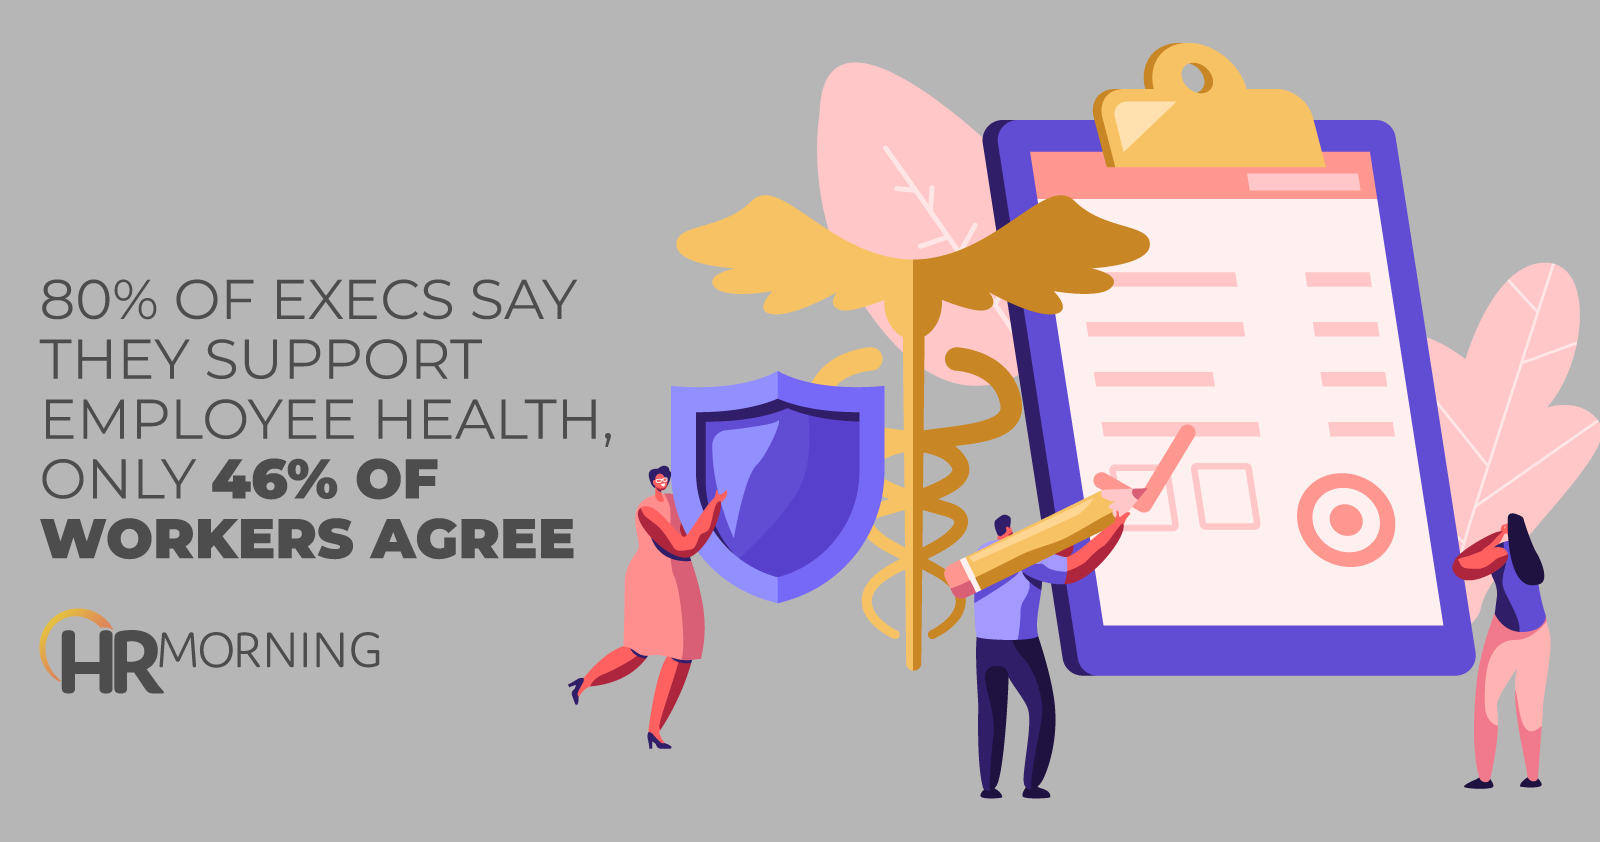 80% Of Execs Say TheyS upport Employee Health Only 46% Of Workers Agree